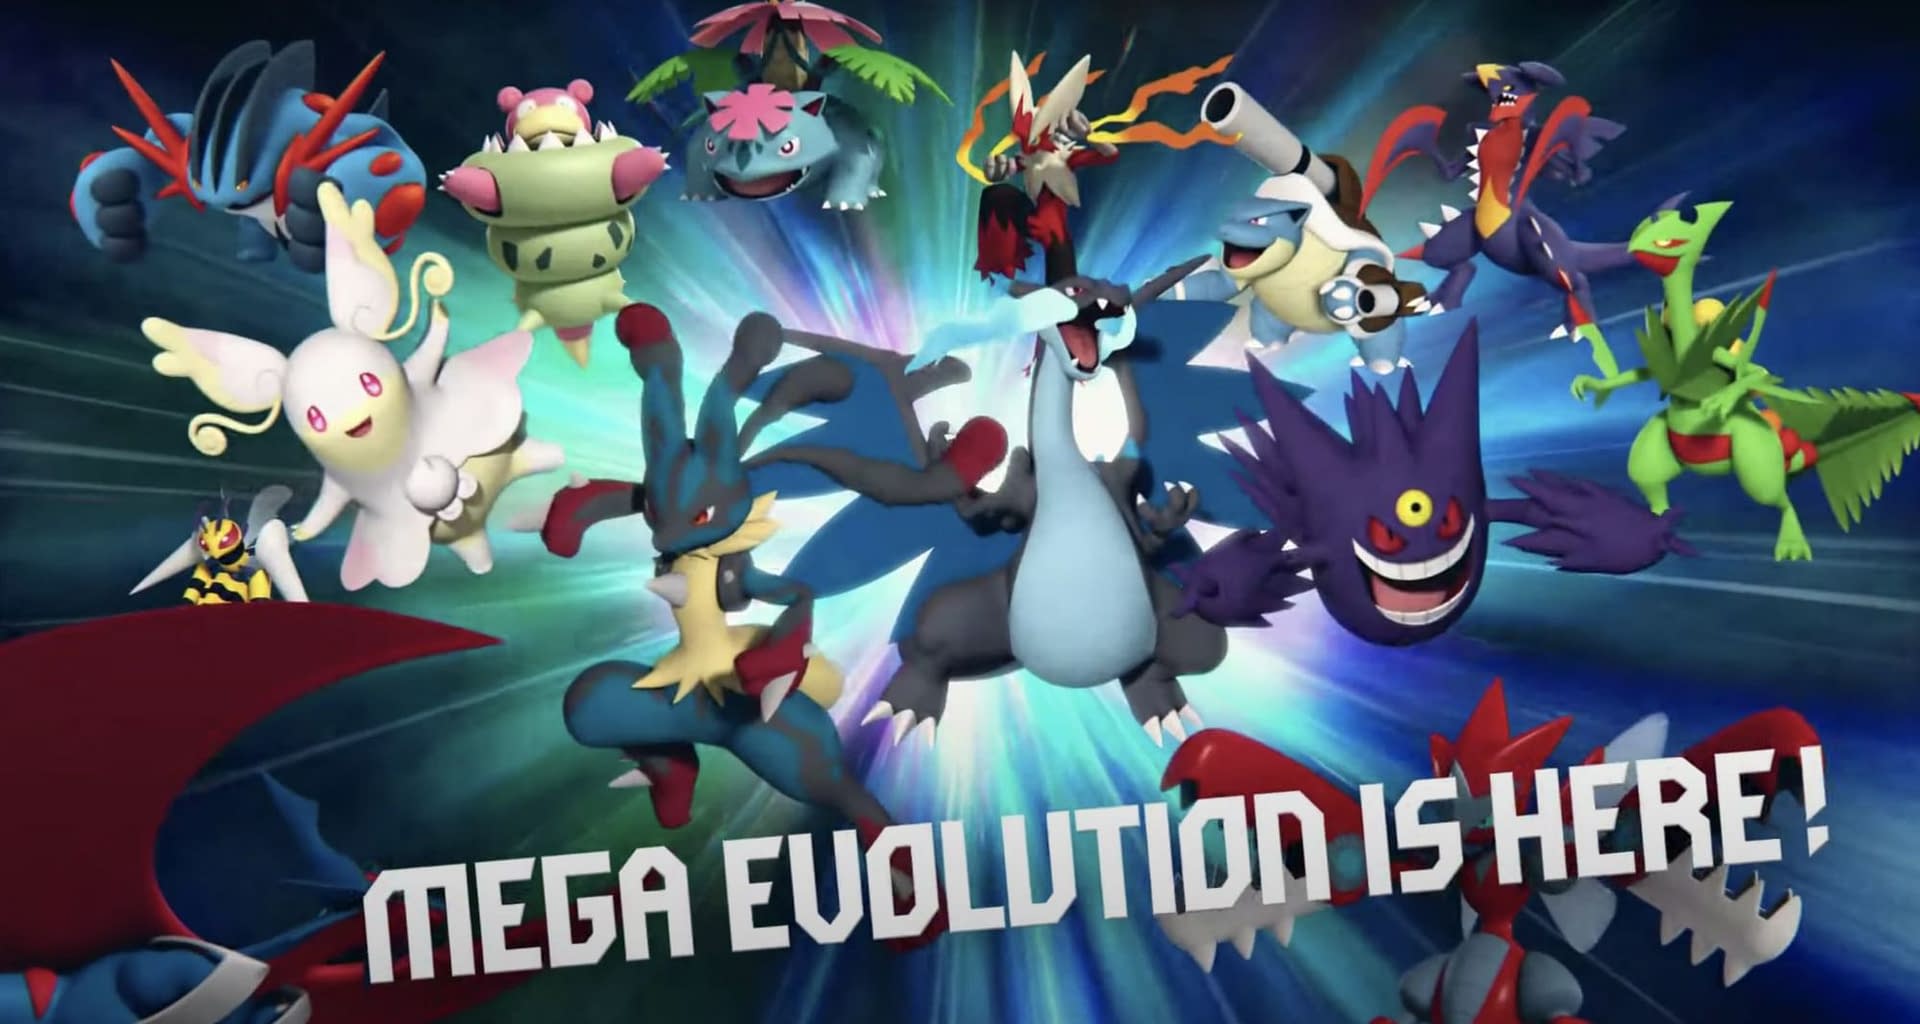 New Megas Have Been Added To The Pokémon GO Code